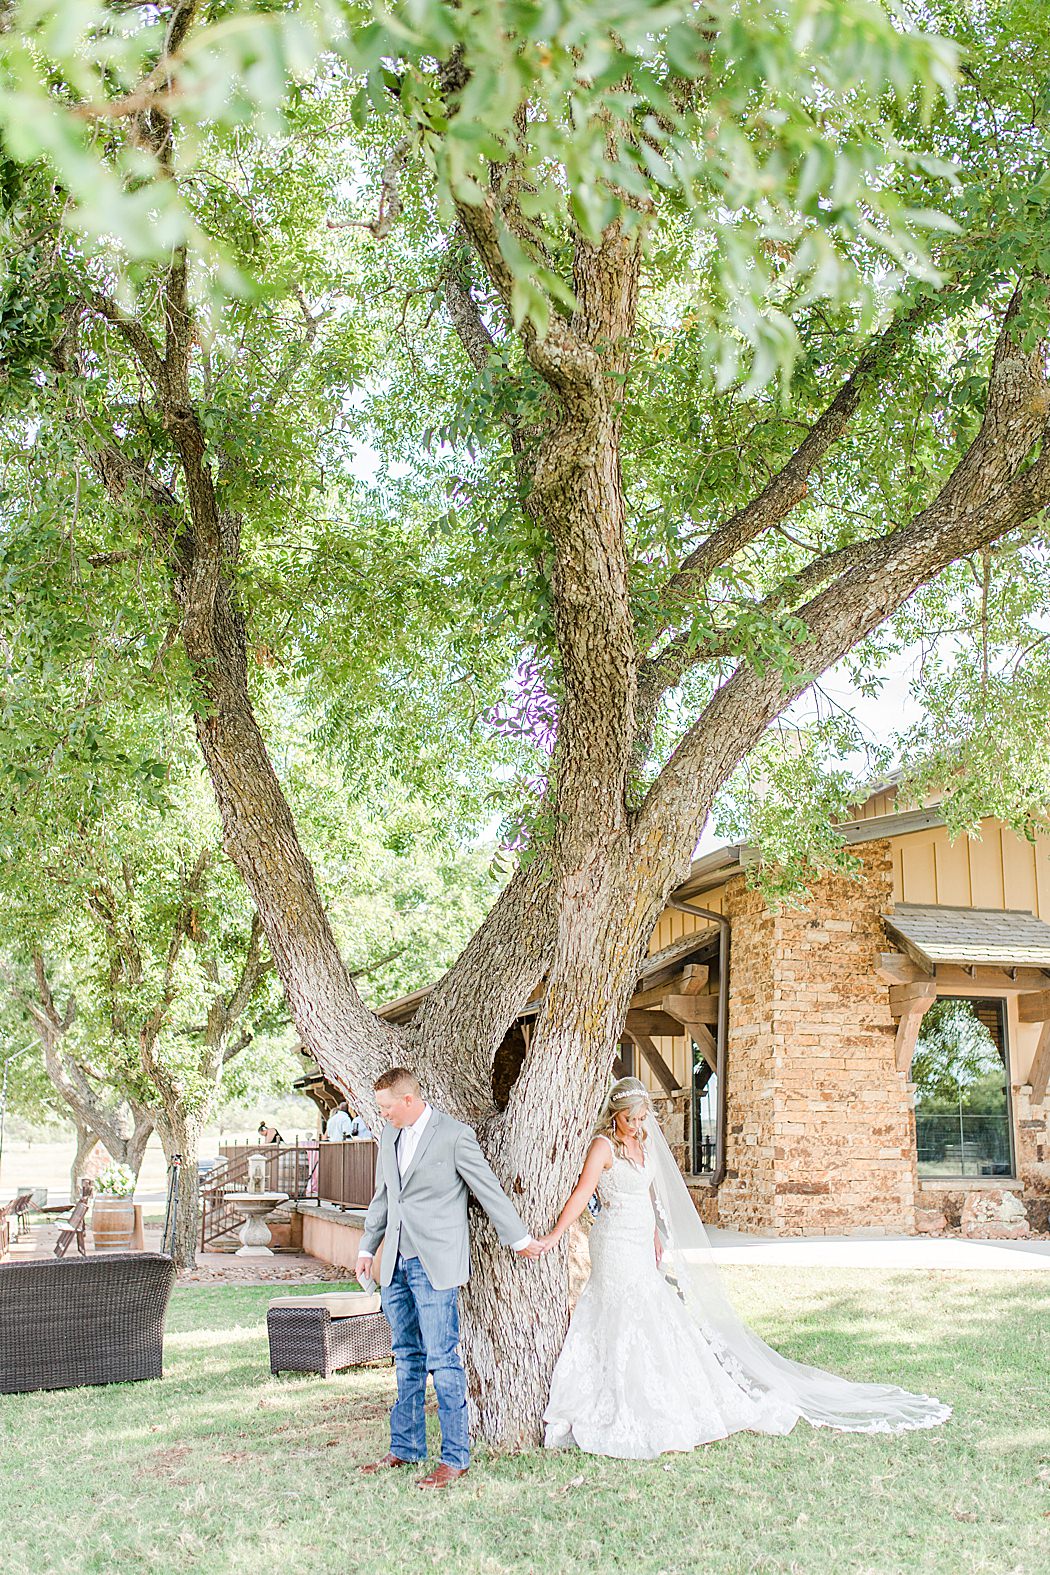 Summer Wedding at The Lodge at Country Inn Cottages in Fredericksburg Texas by Allison Jeffers Photography 0025